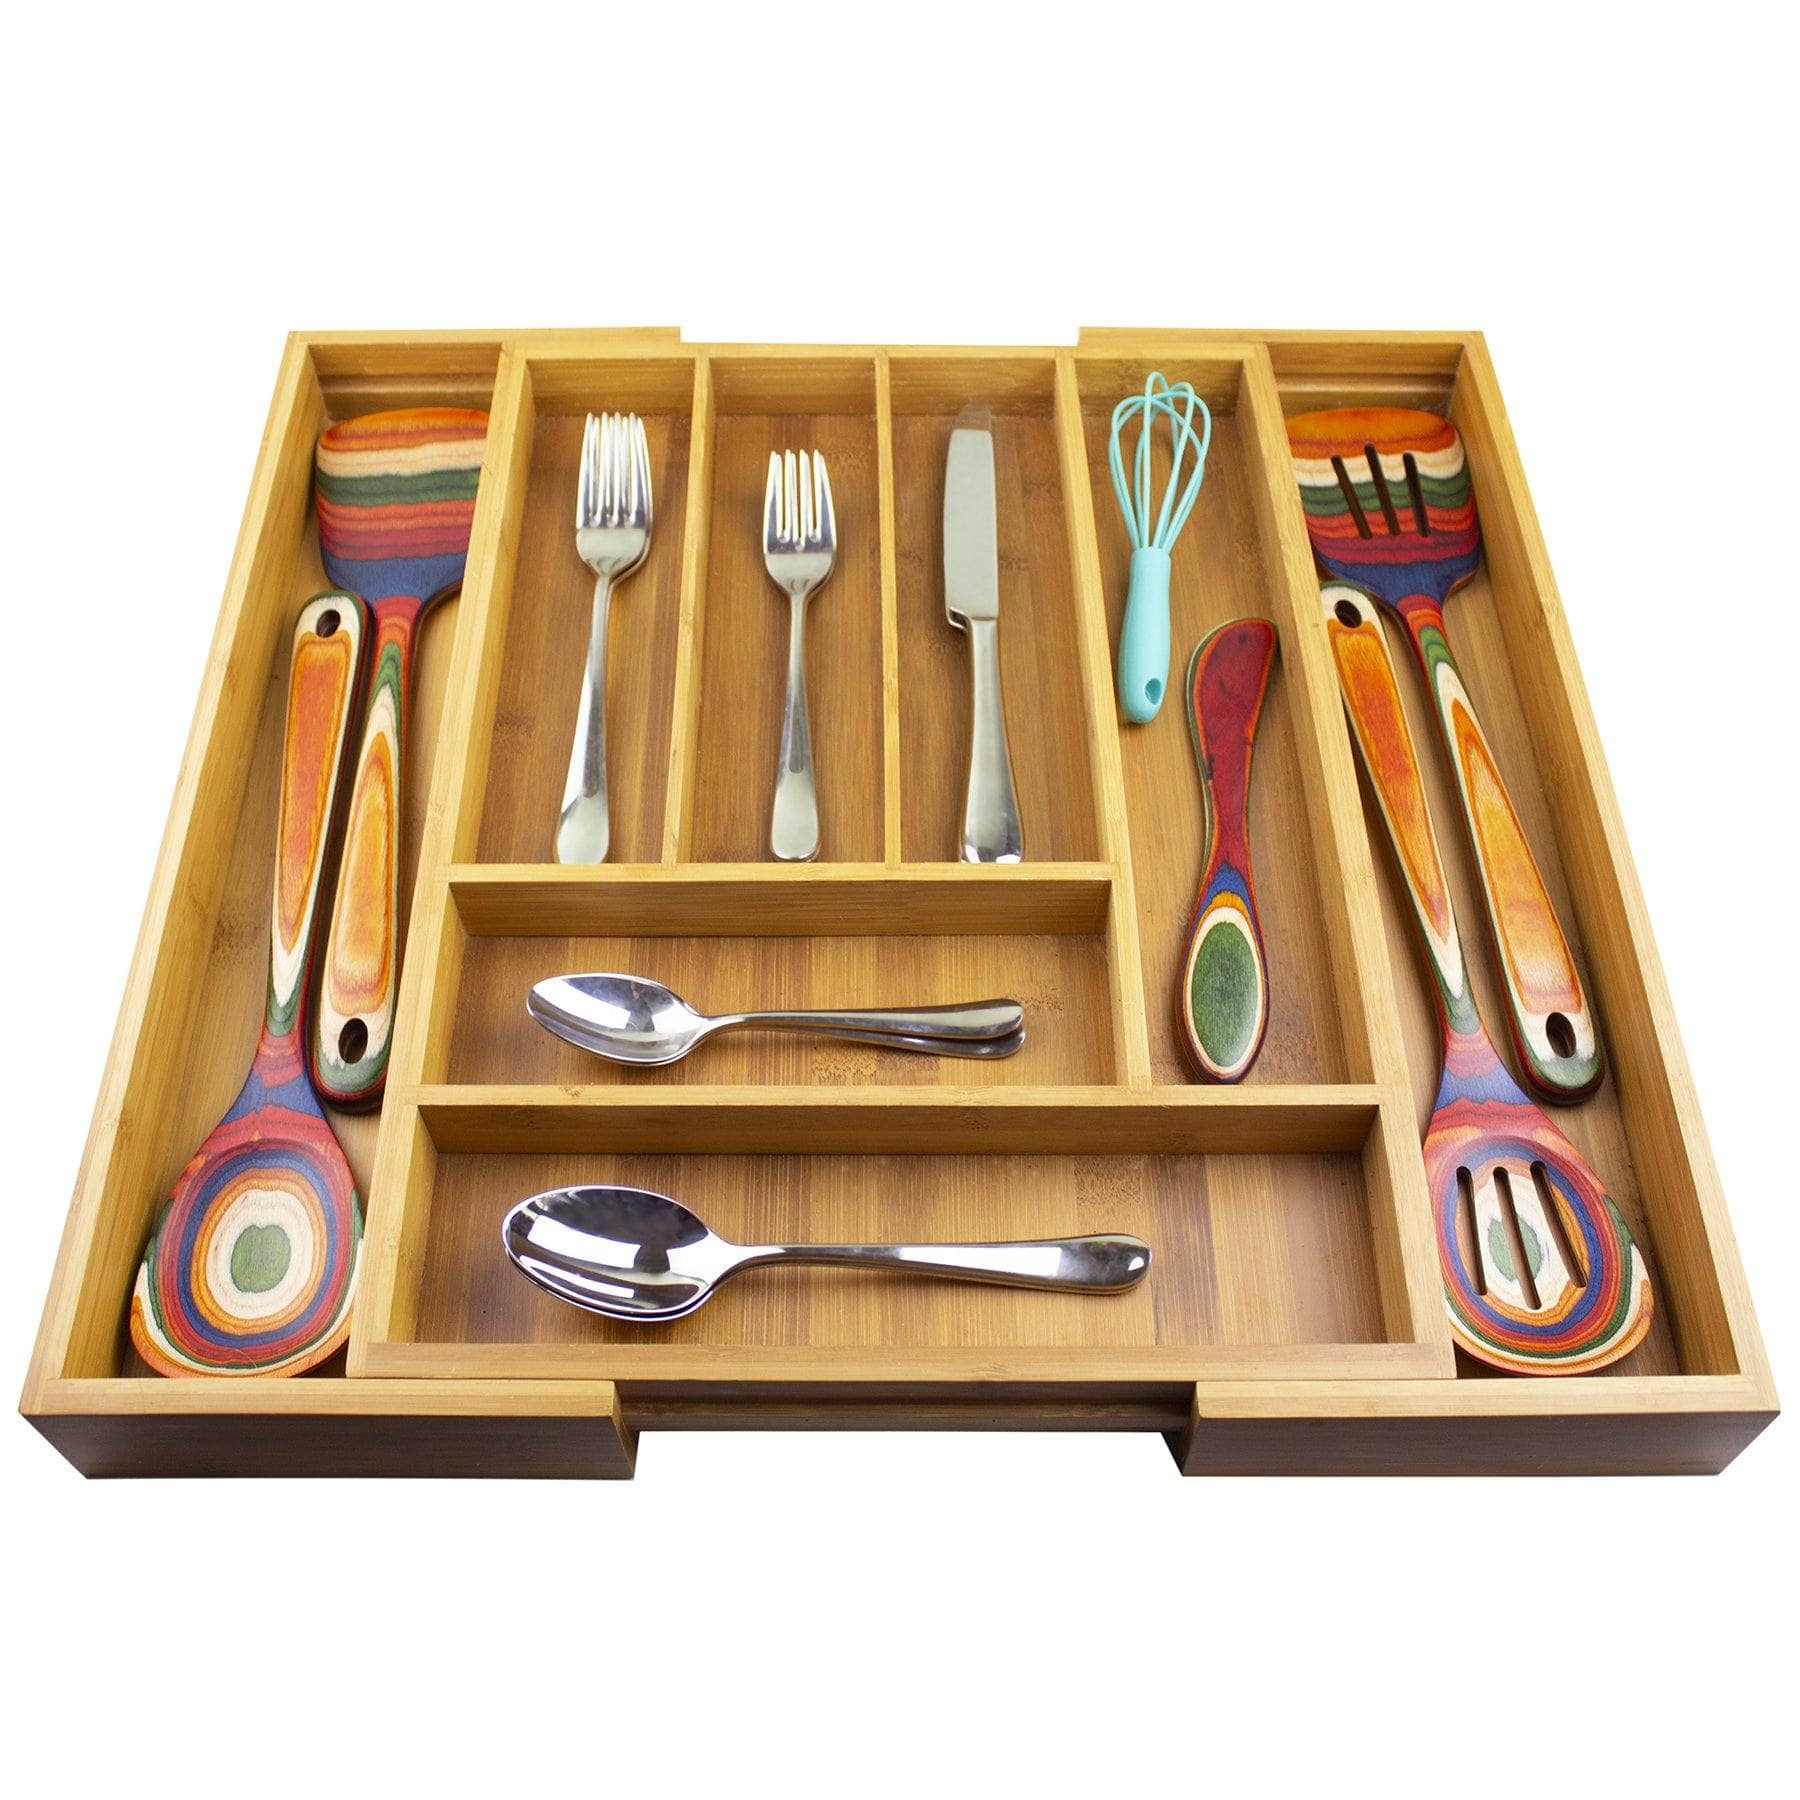 https://totallybamboo.com/cdn/shop/products/expandable-silverware-organizer-and-utensil-holder-8-compartments-with-dividers-totally-bamboo-865899.jpg?v=1628095198